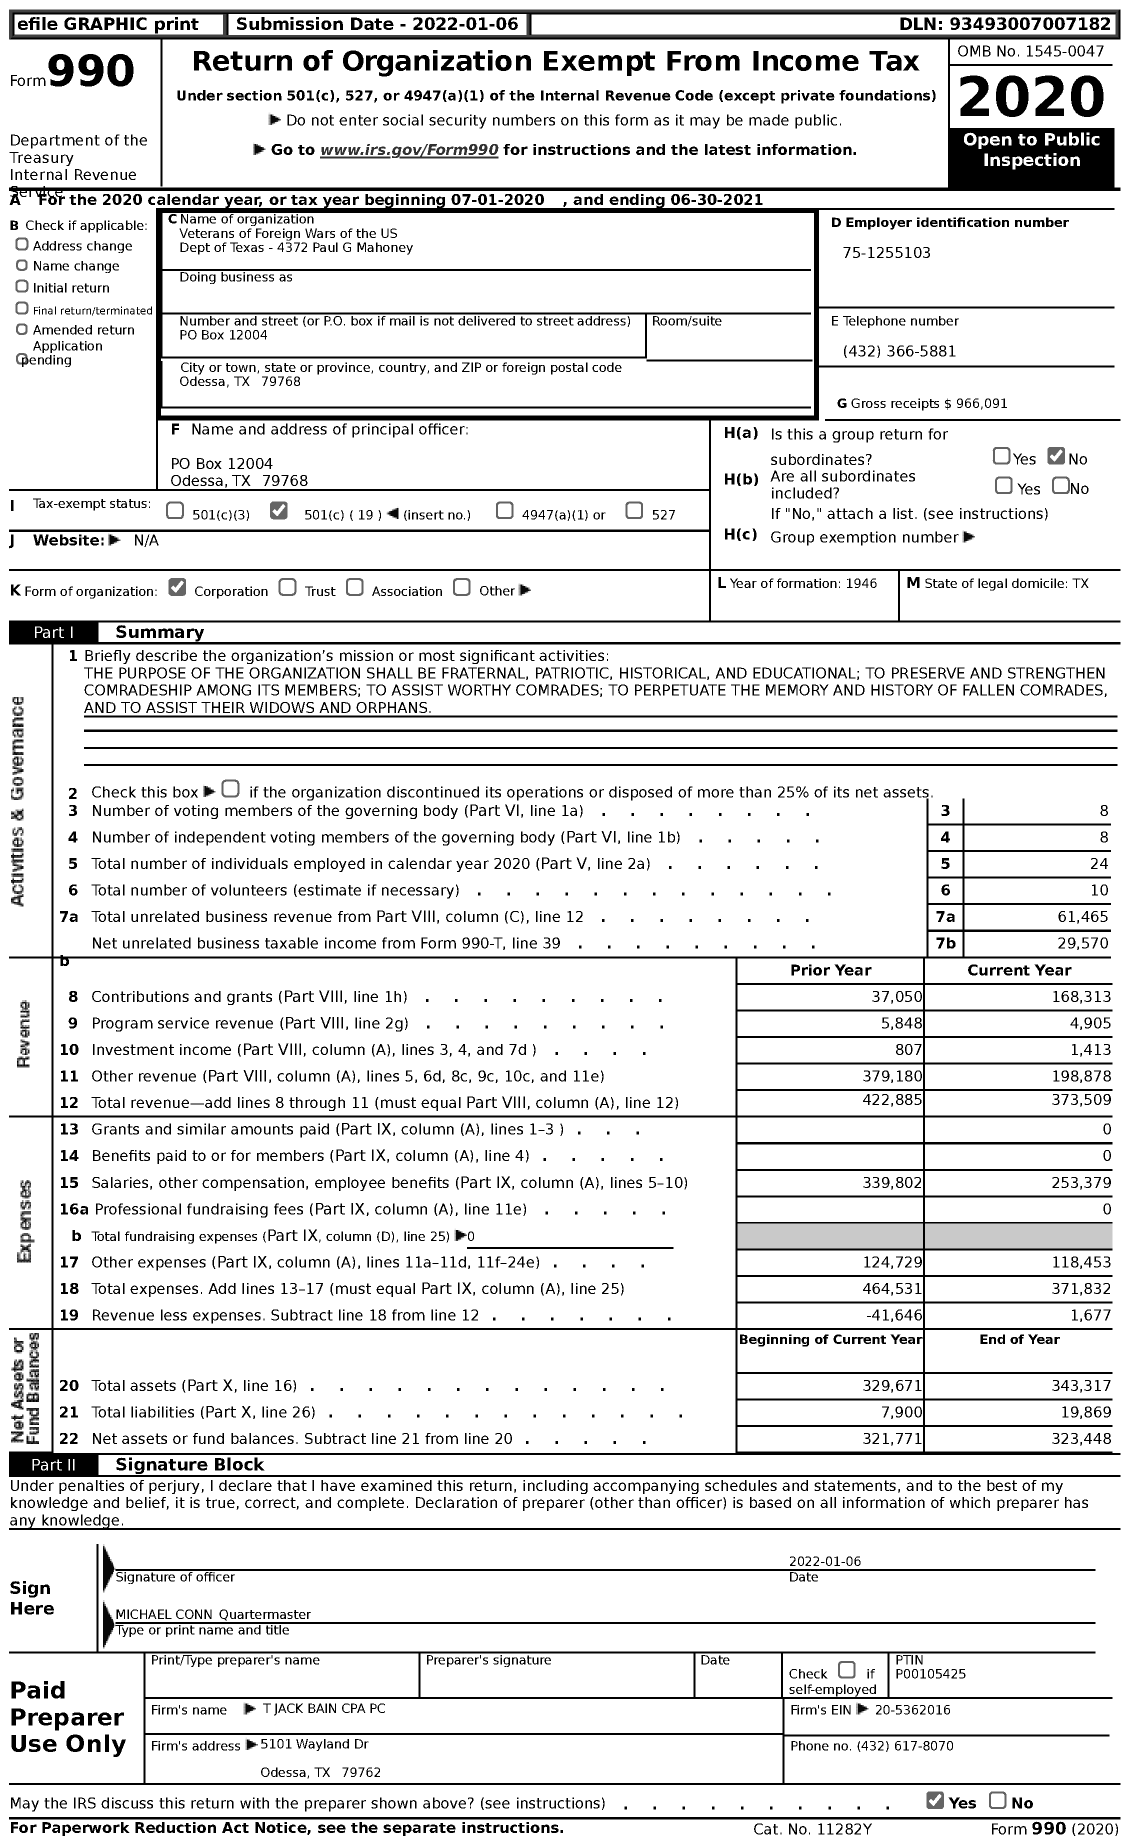 Image of first page of 2020 Form 990 for Texas VFW - 4372 Paul G Mahoney